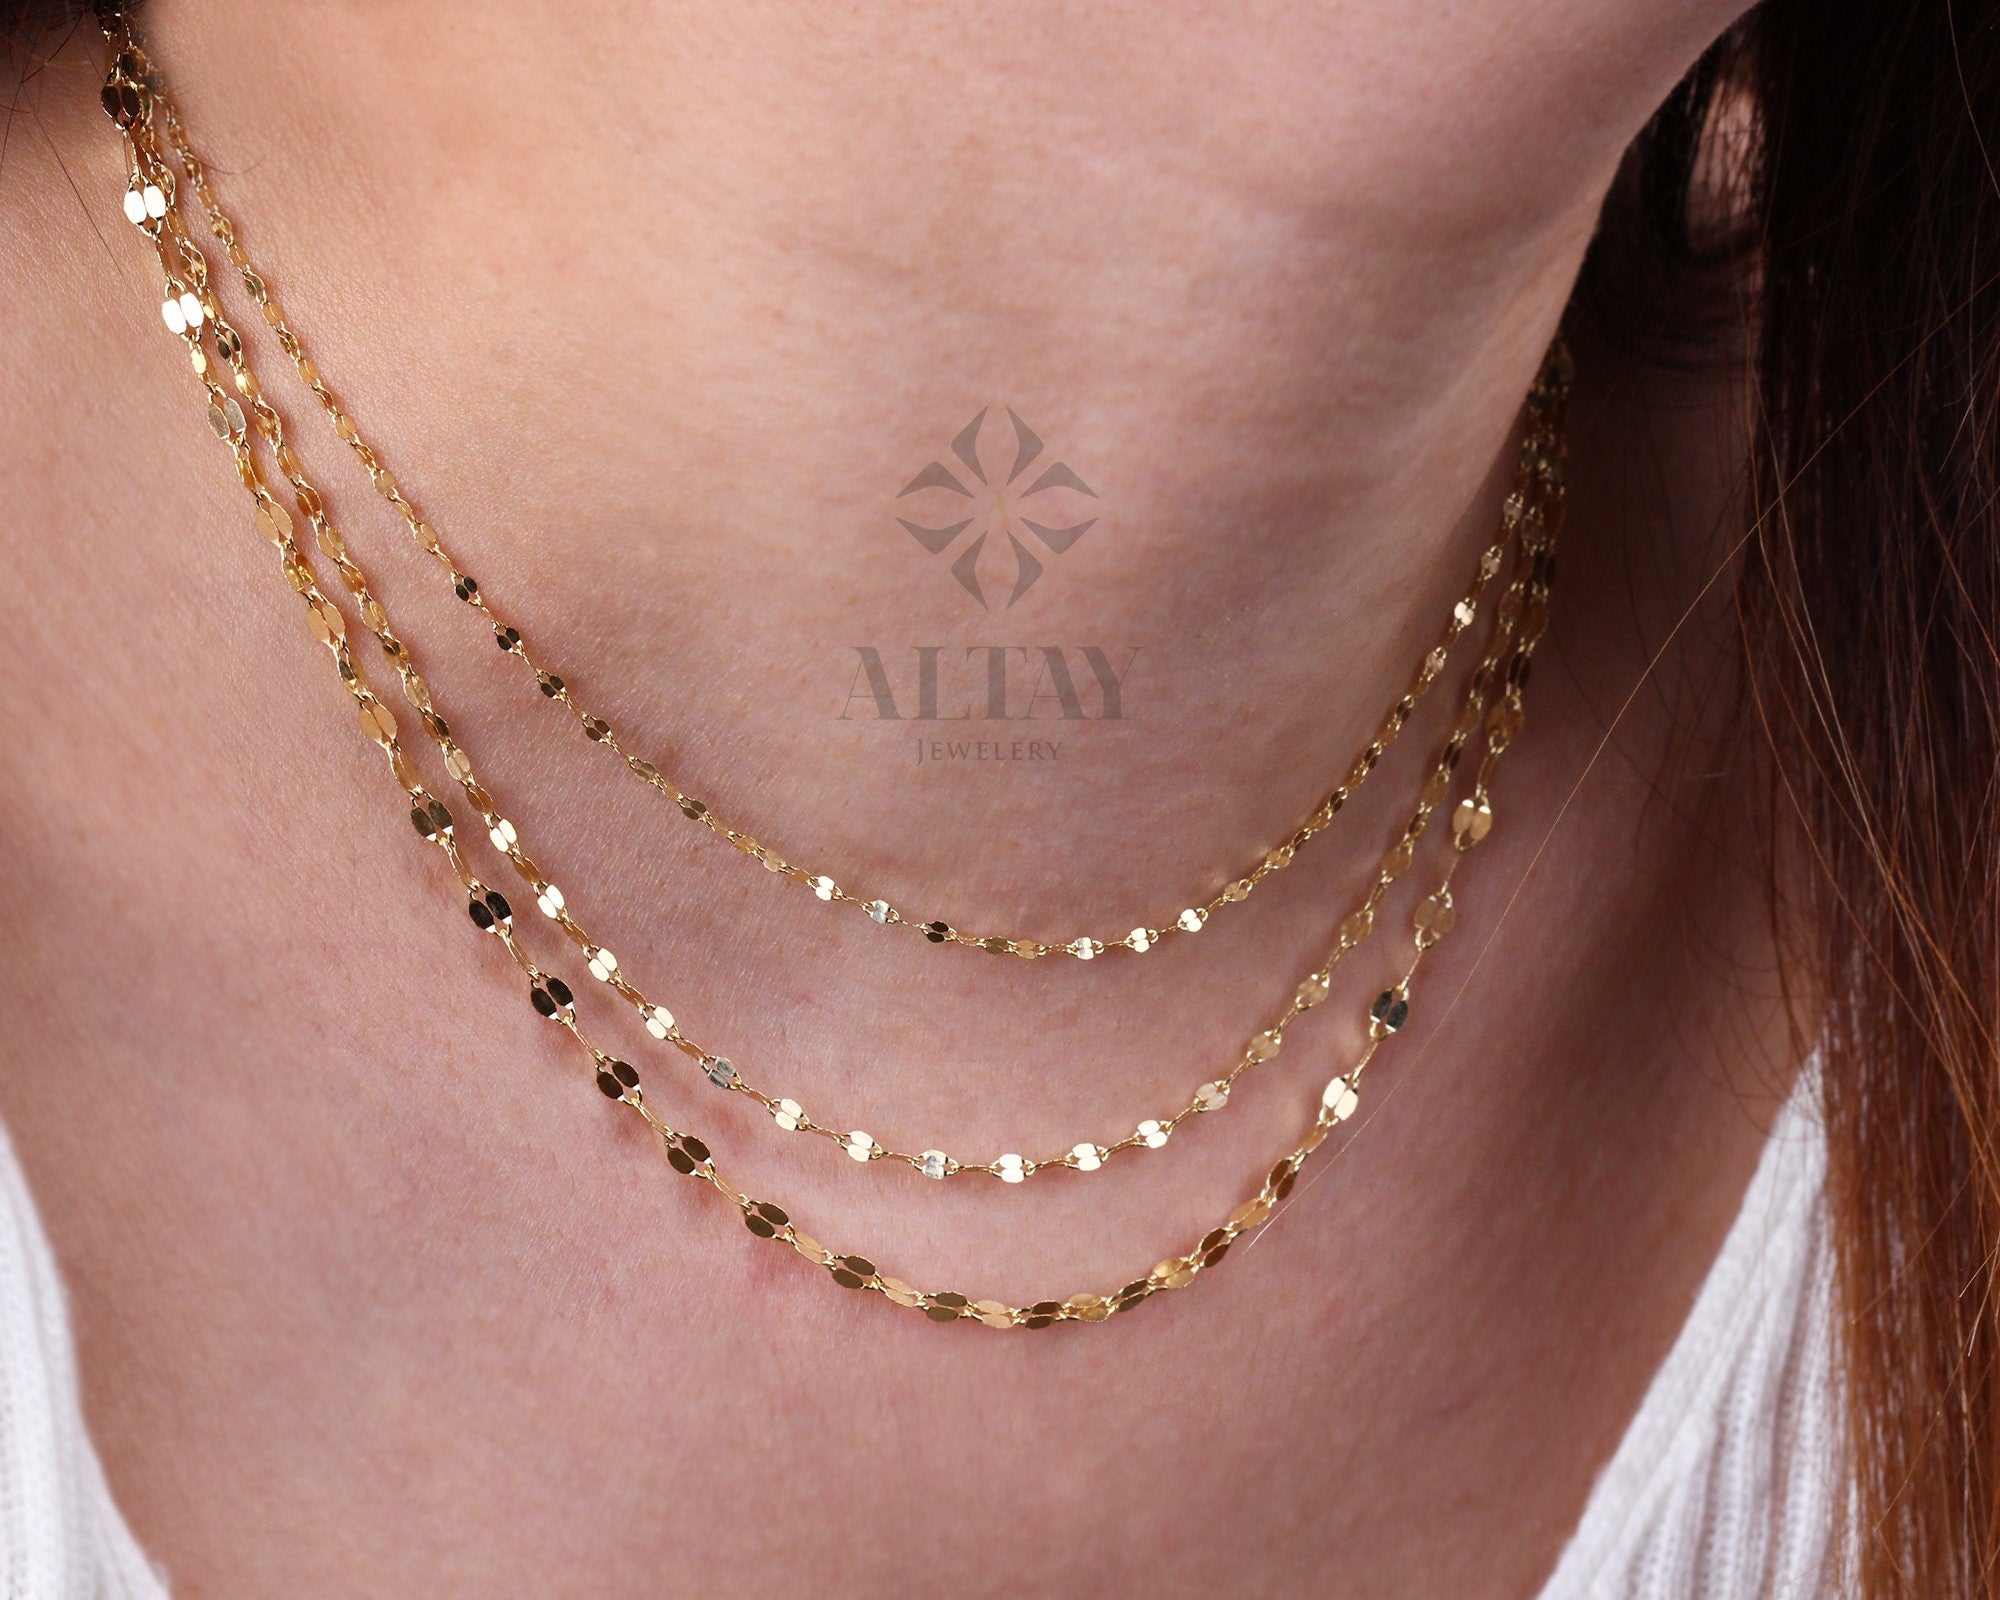 14K Solid Gold Sequin Necklace, Dainty Chain Choker, Dainty Lace Thin Gold Charm, Delicate Sequin Necklace, Gift For Her